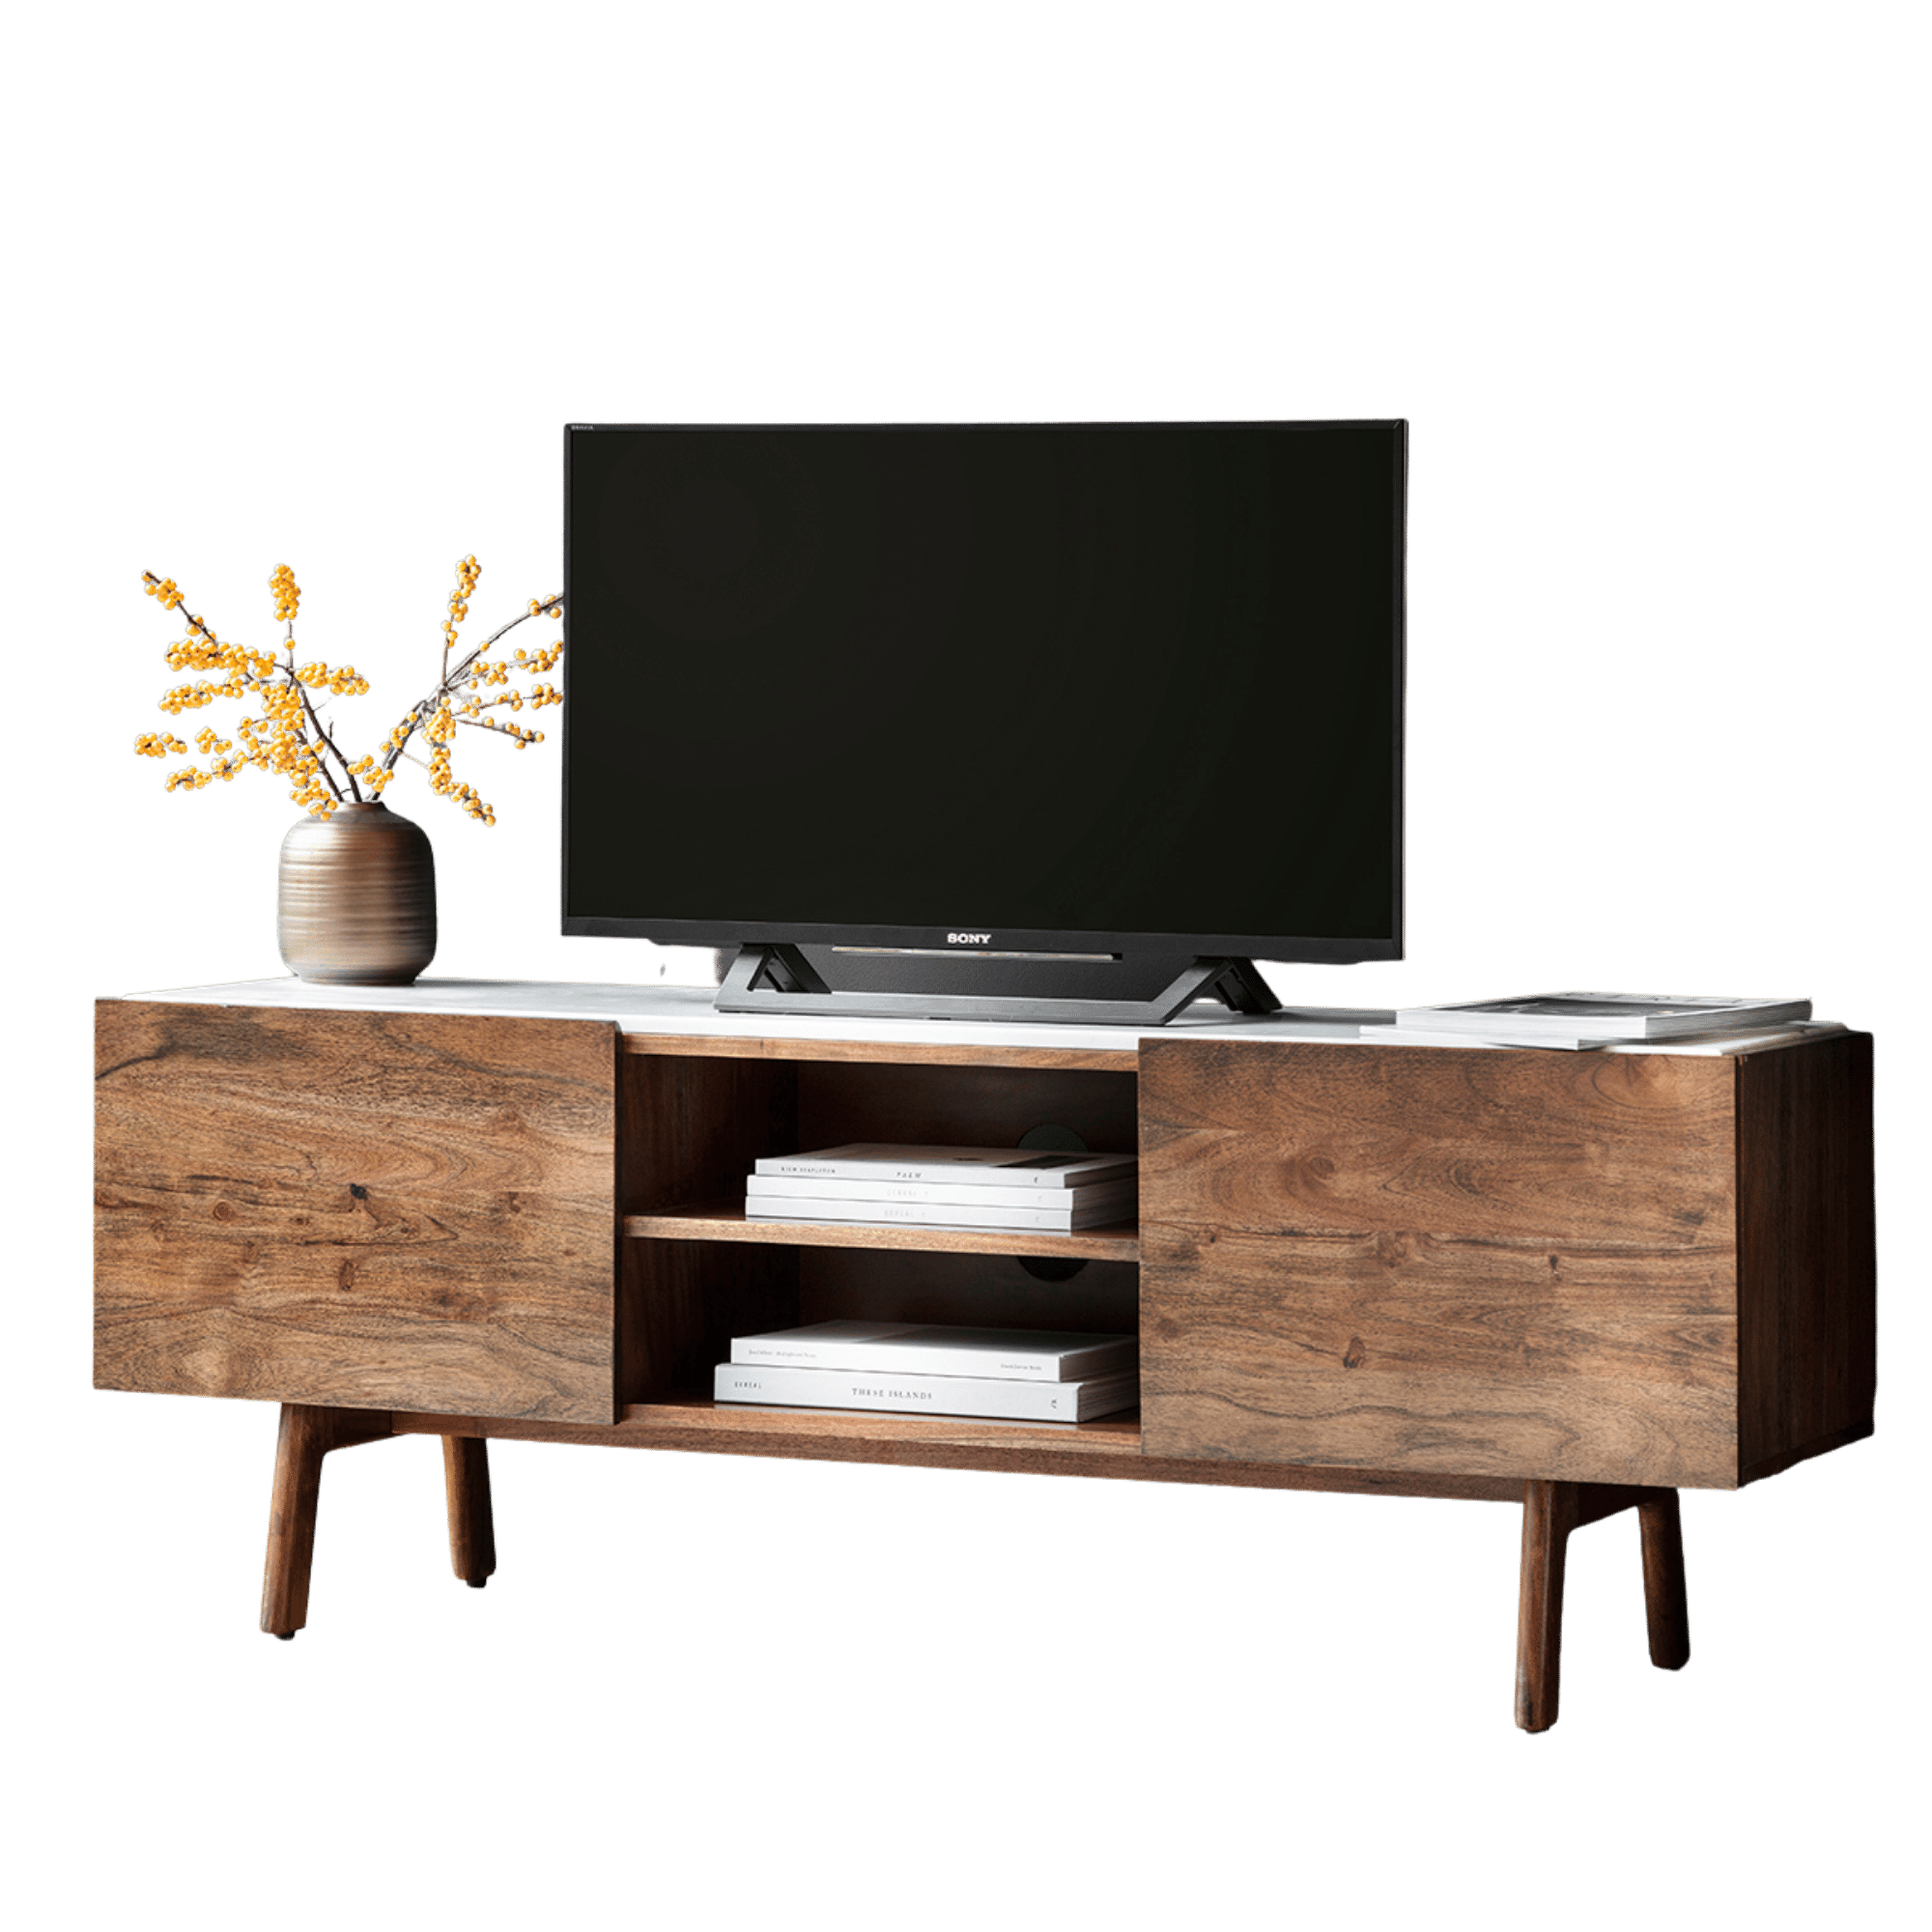 Fresca wood tv stand with marble top | malletandplane.com